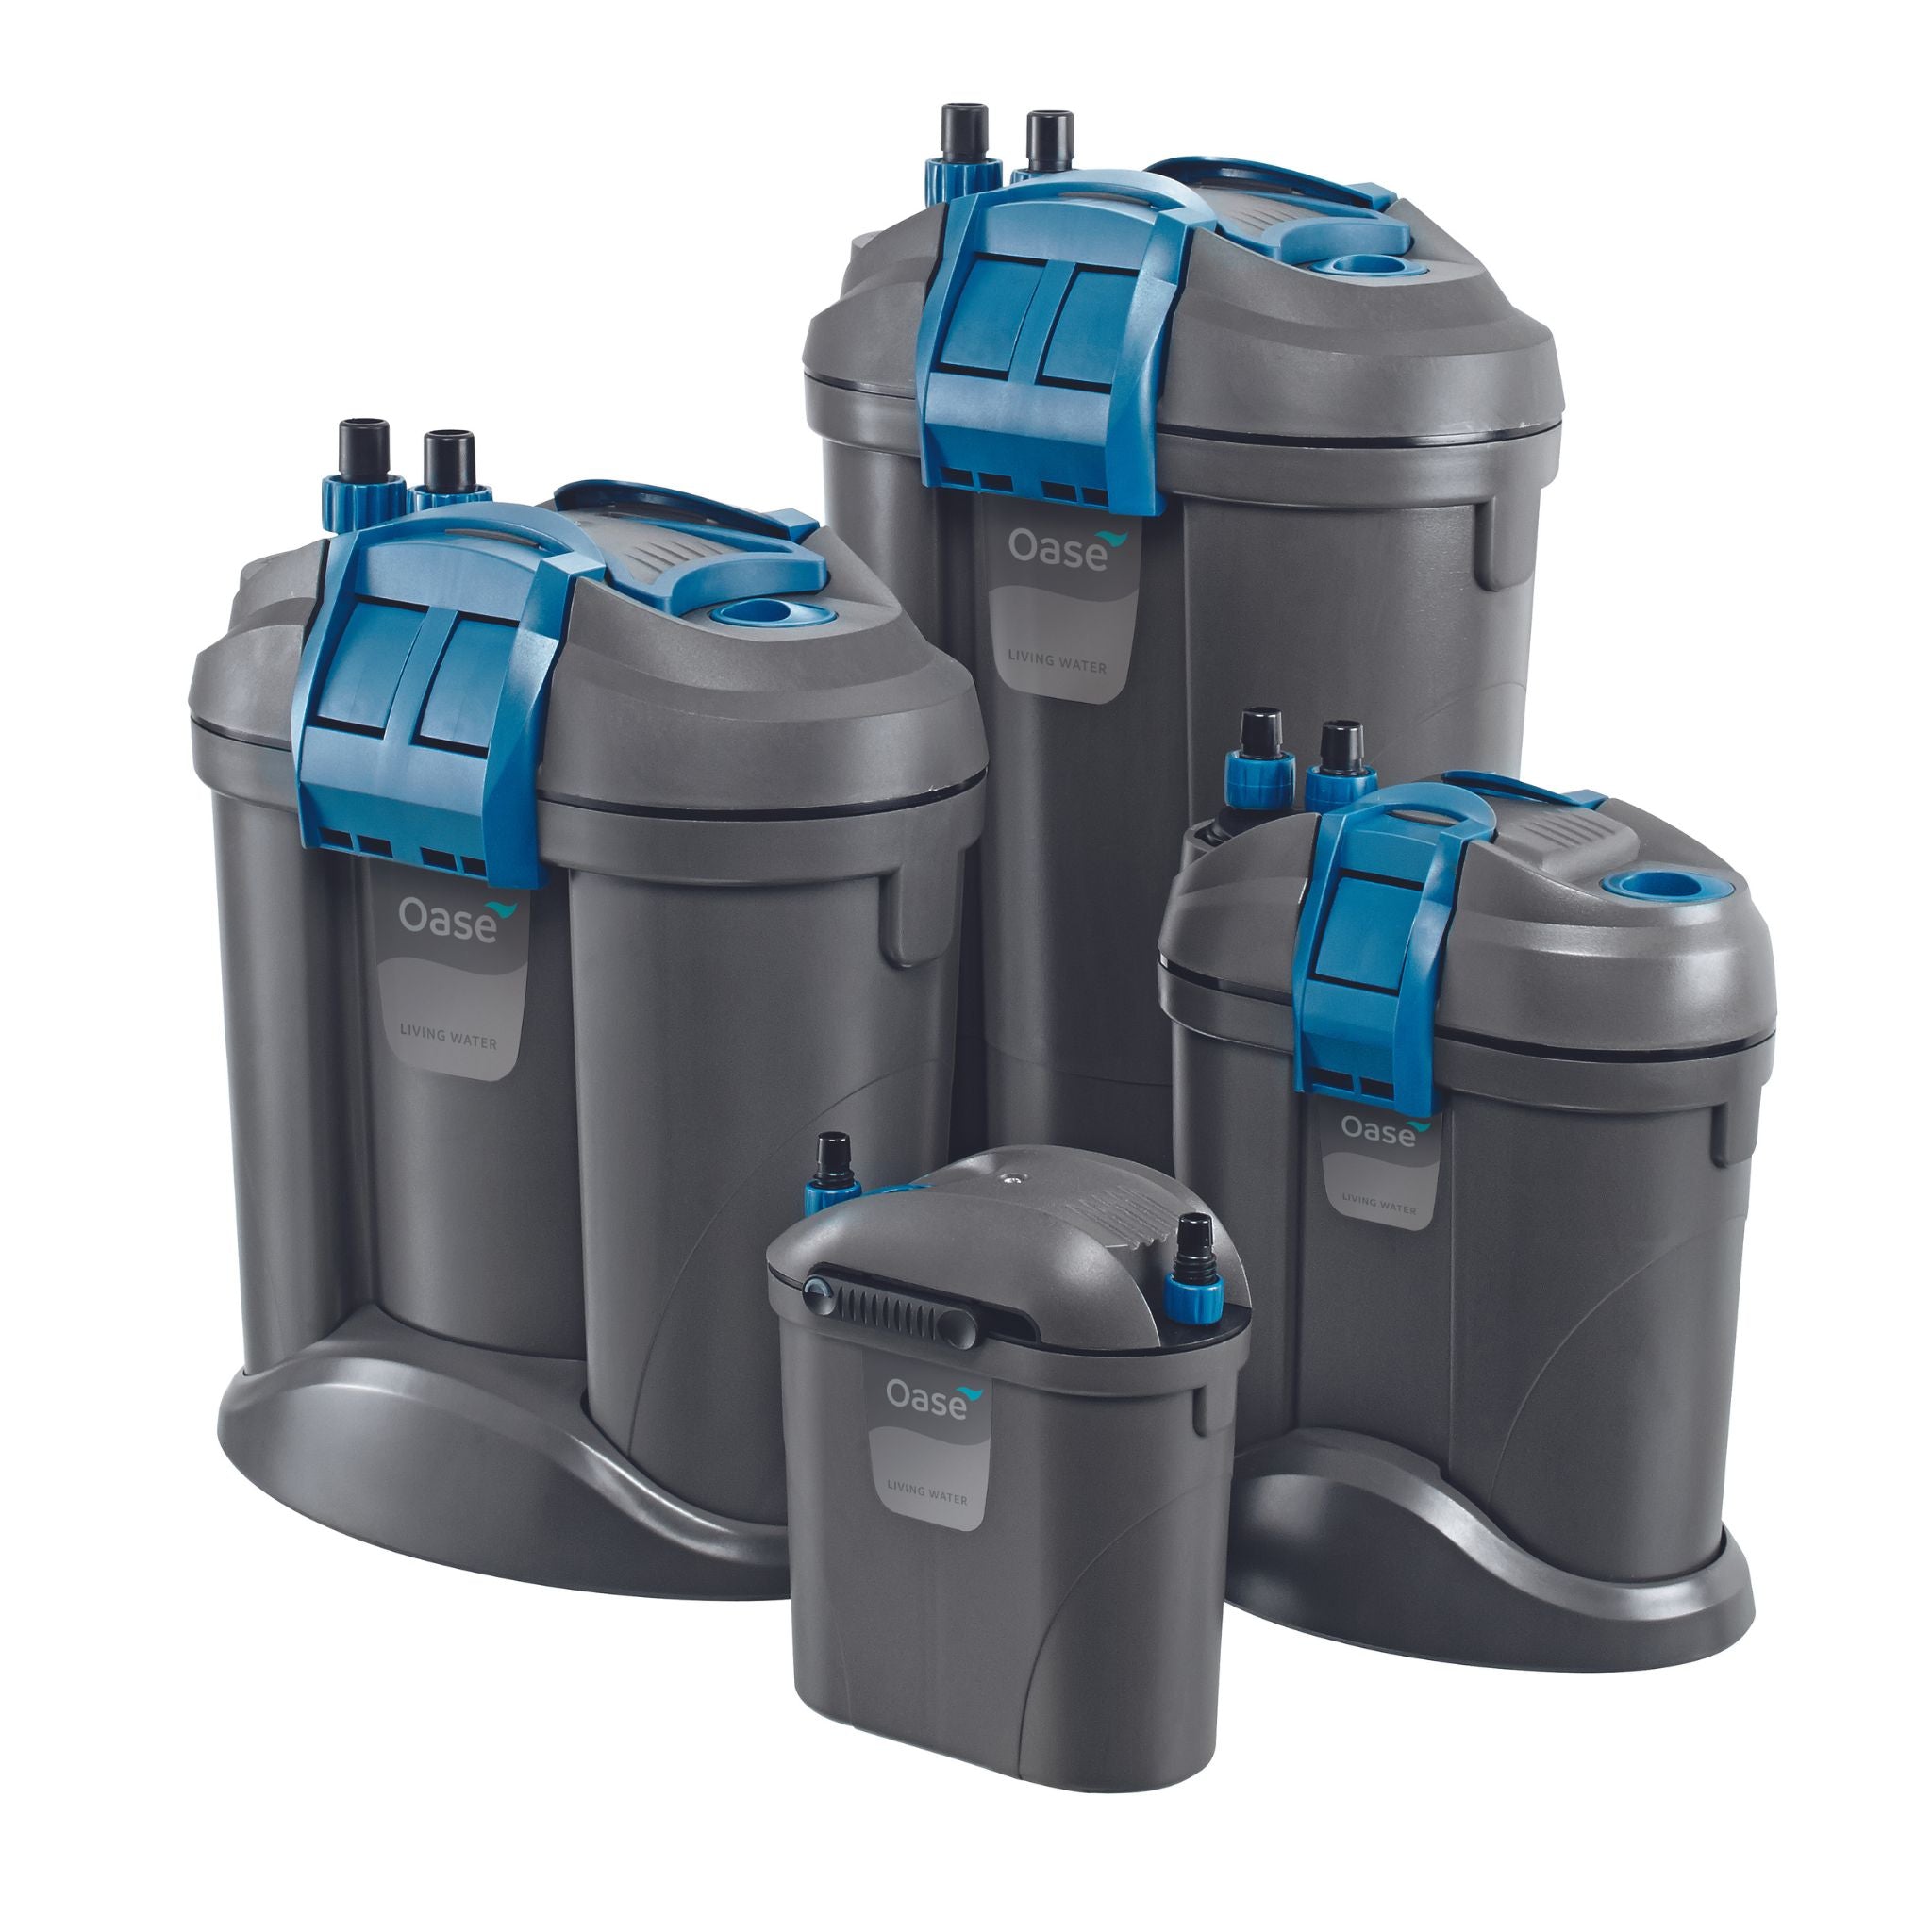 FiltoSmart by OASE.Small & medium external filter. Suitable for aquariums with a volume of 60 to 300 litres.